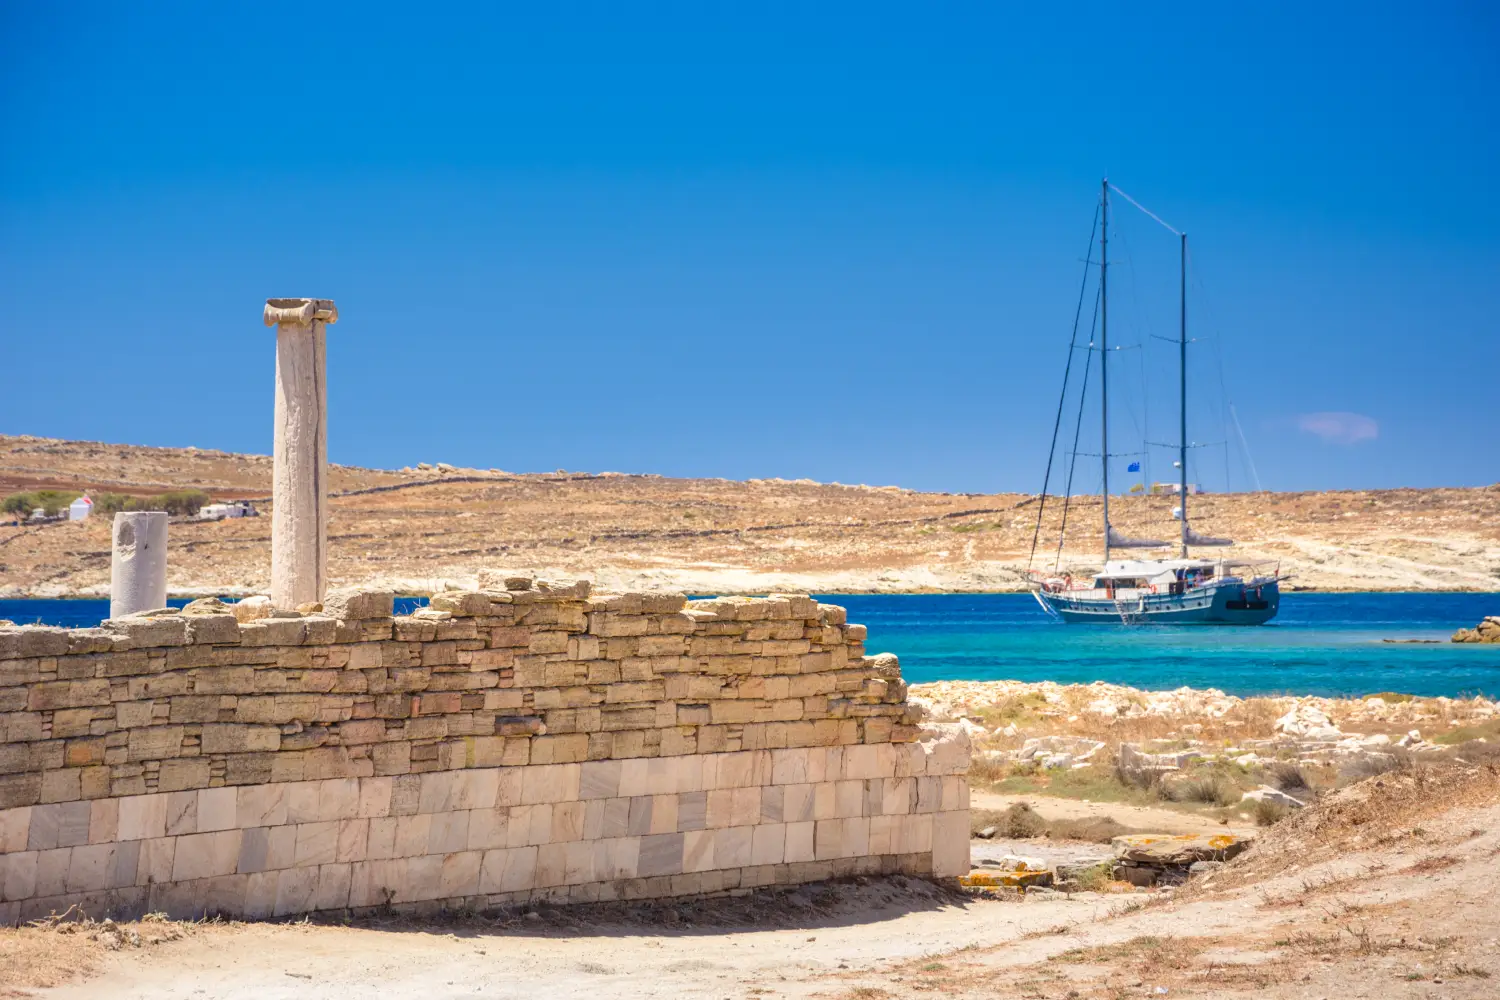 Ferry to Delos - Ancient ruins in the island of Delos in Cyclades, one of the most important mythological, historical and archaeological sites in Greece.